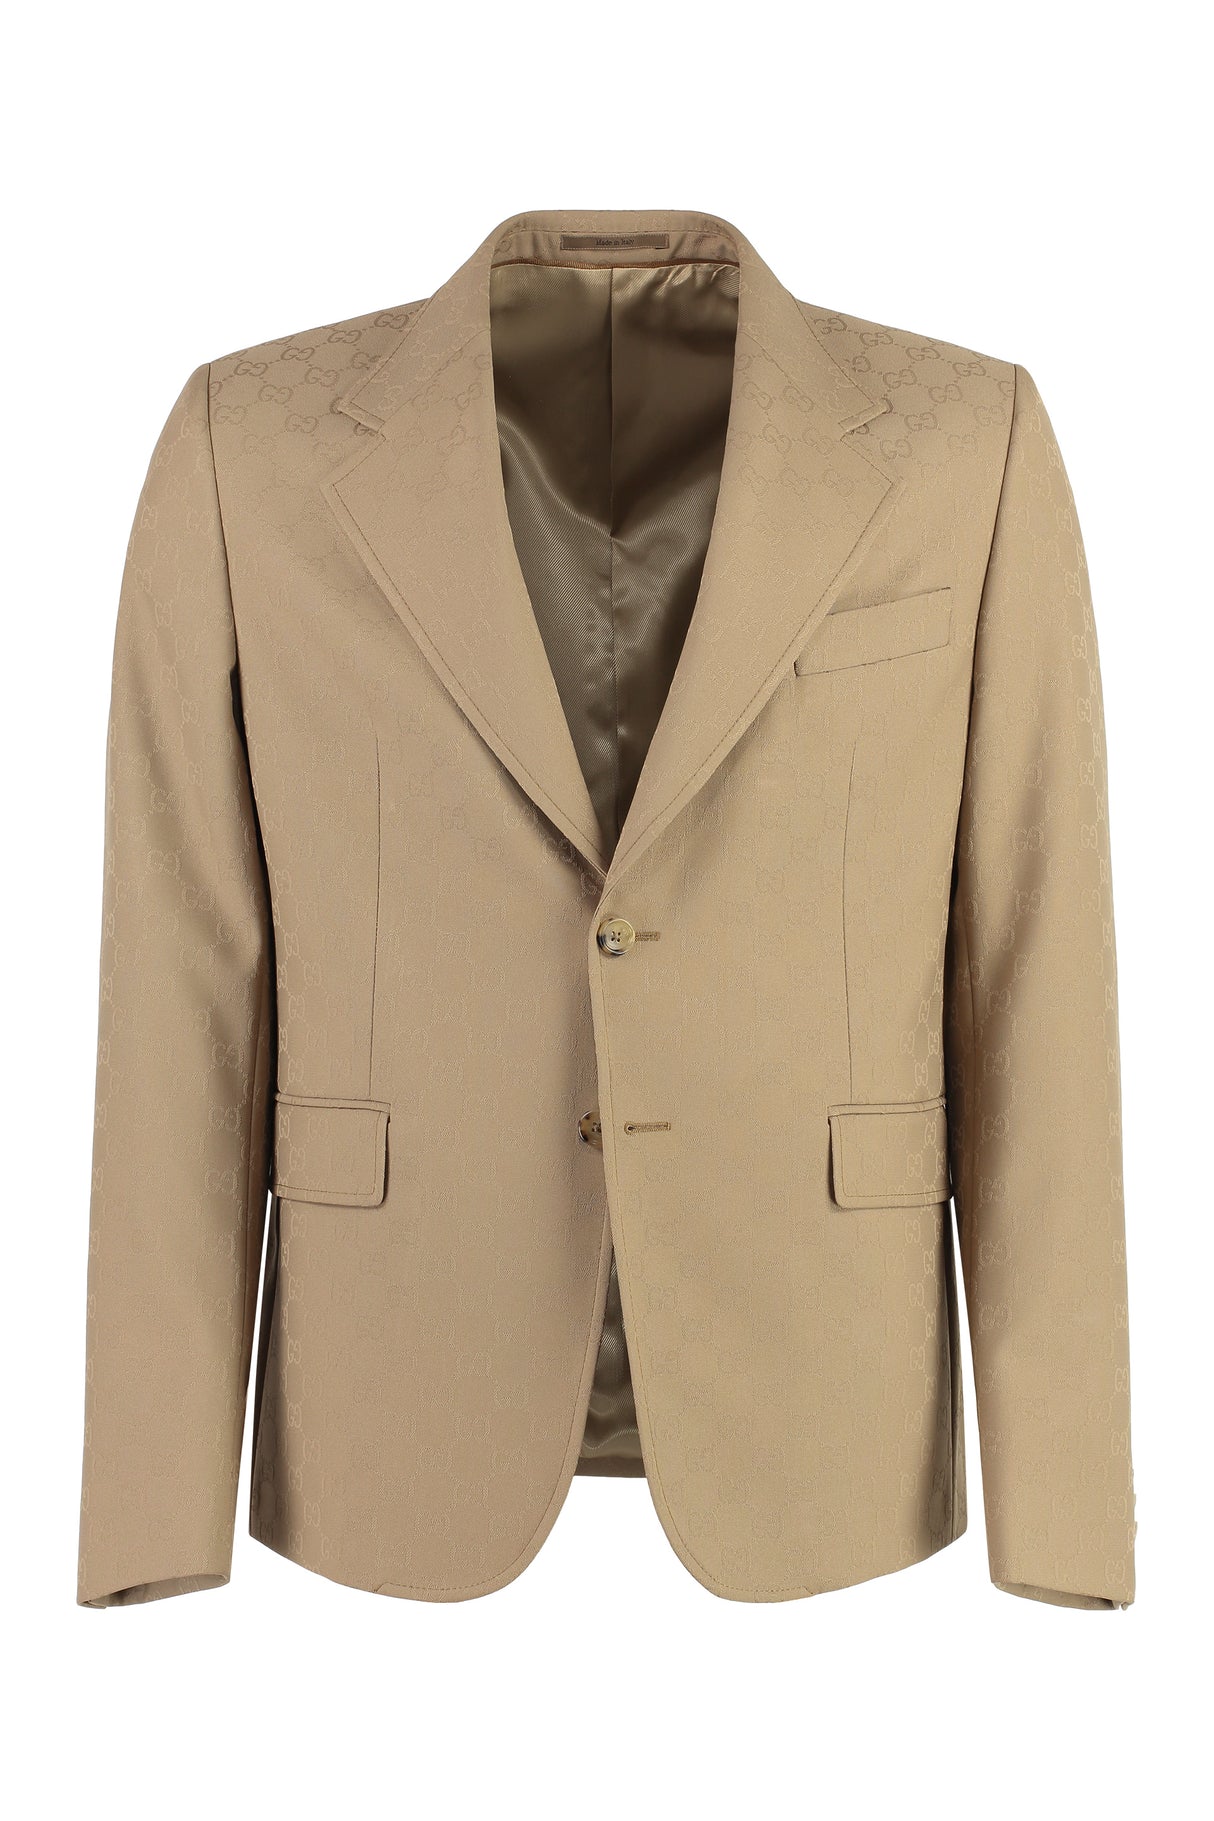 GUCCI Men's Single-Breasted Two-Button Jacket in Beige for SS24 Collection